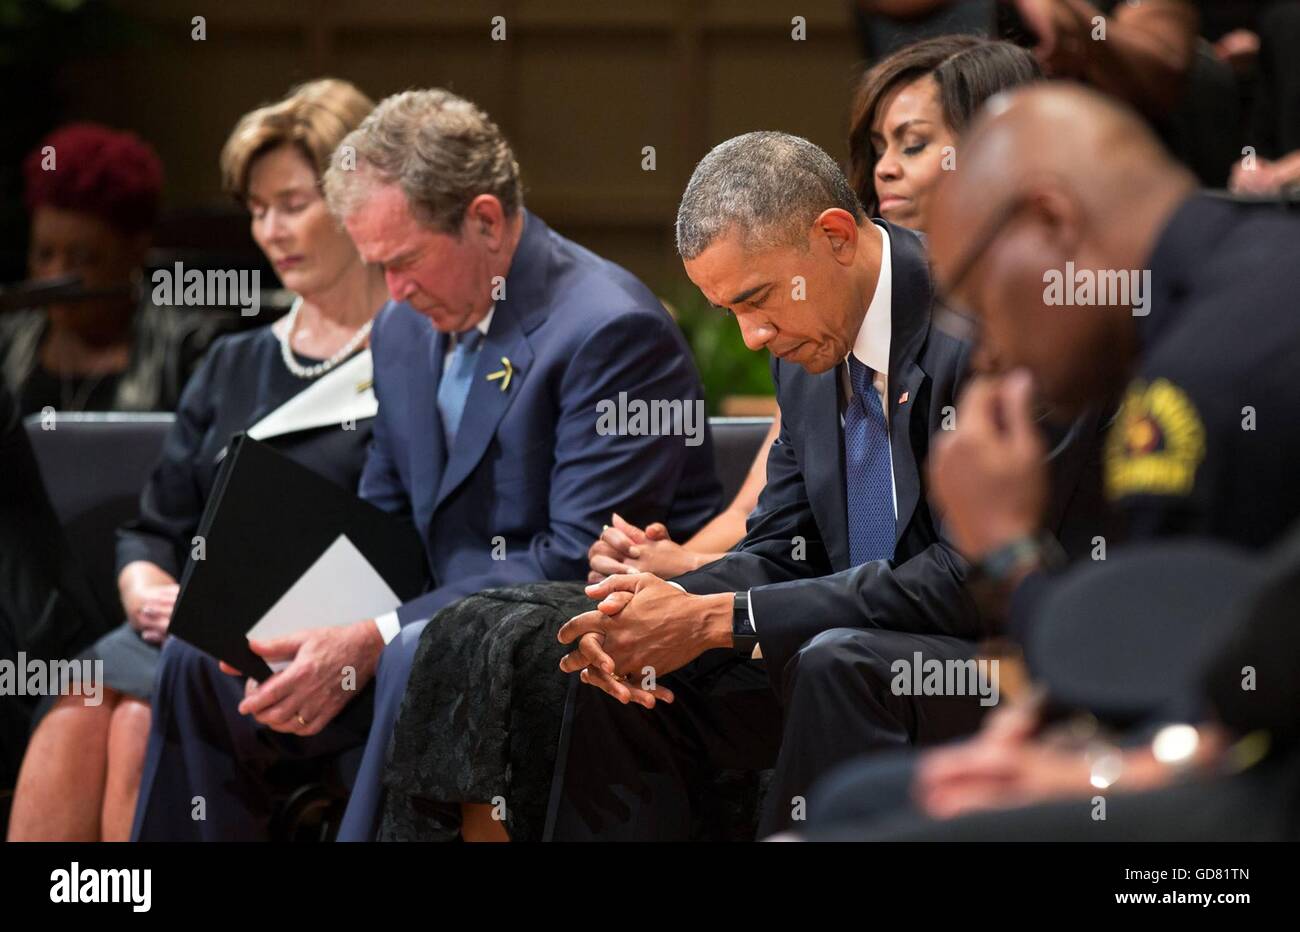 U.S President Barack Obama bows his head alongside former President George W. Bush during a memorial service for the five police officers who were killed by a sniper during protests July 11, 2016 in Dallas, Texas. Stock Photo